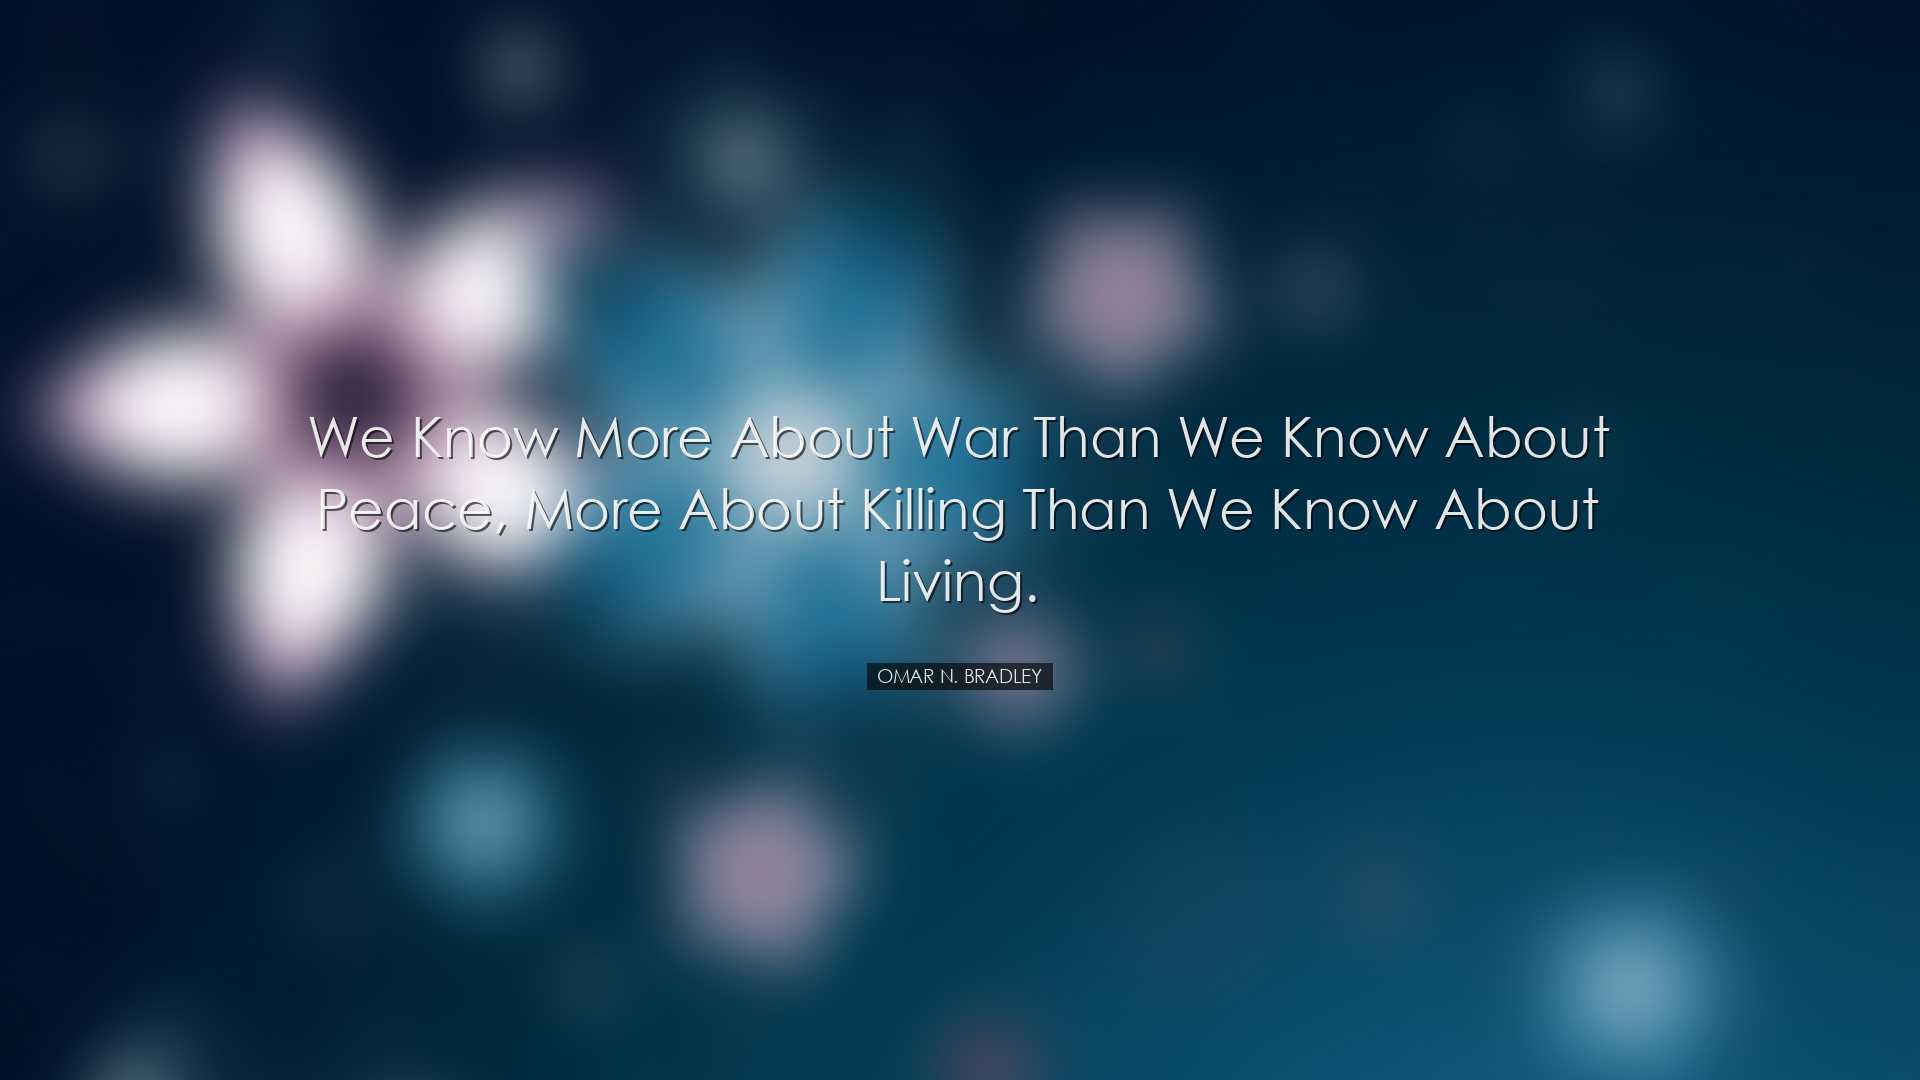 We know more about war than we know about peace, more about killin